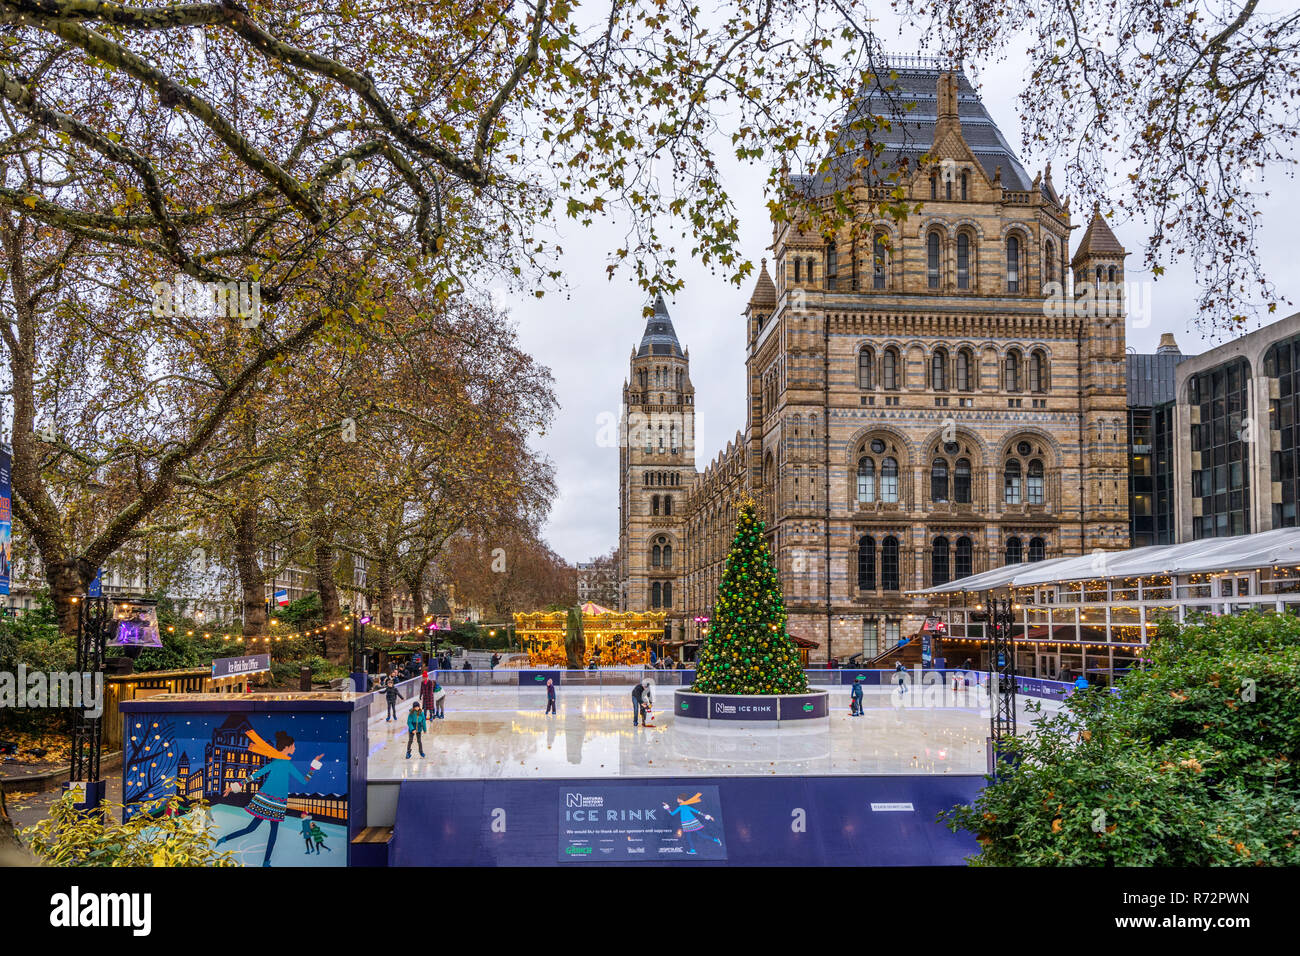 Natural History Ice Rink in London Stock Photo